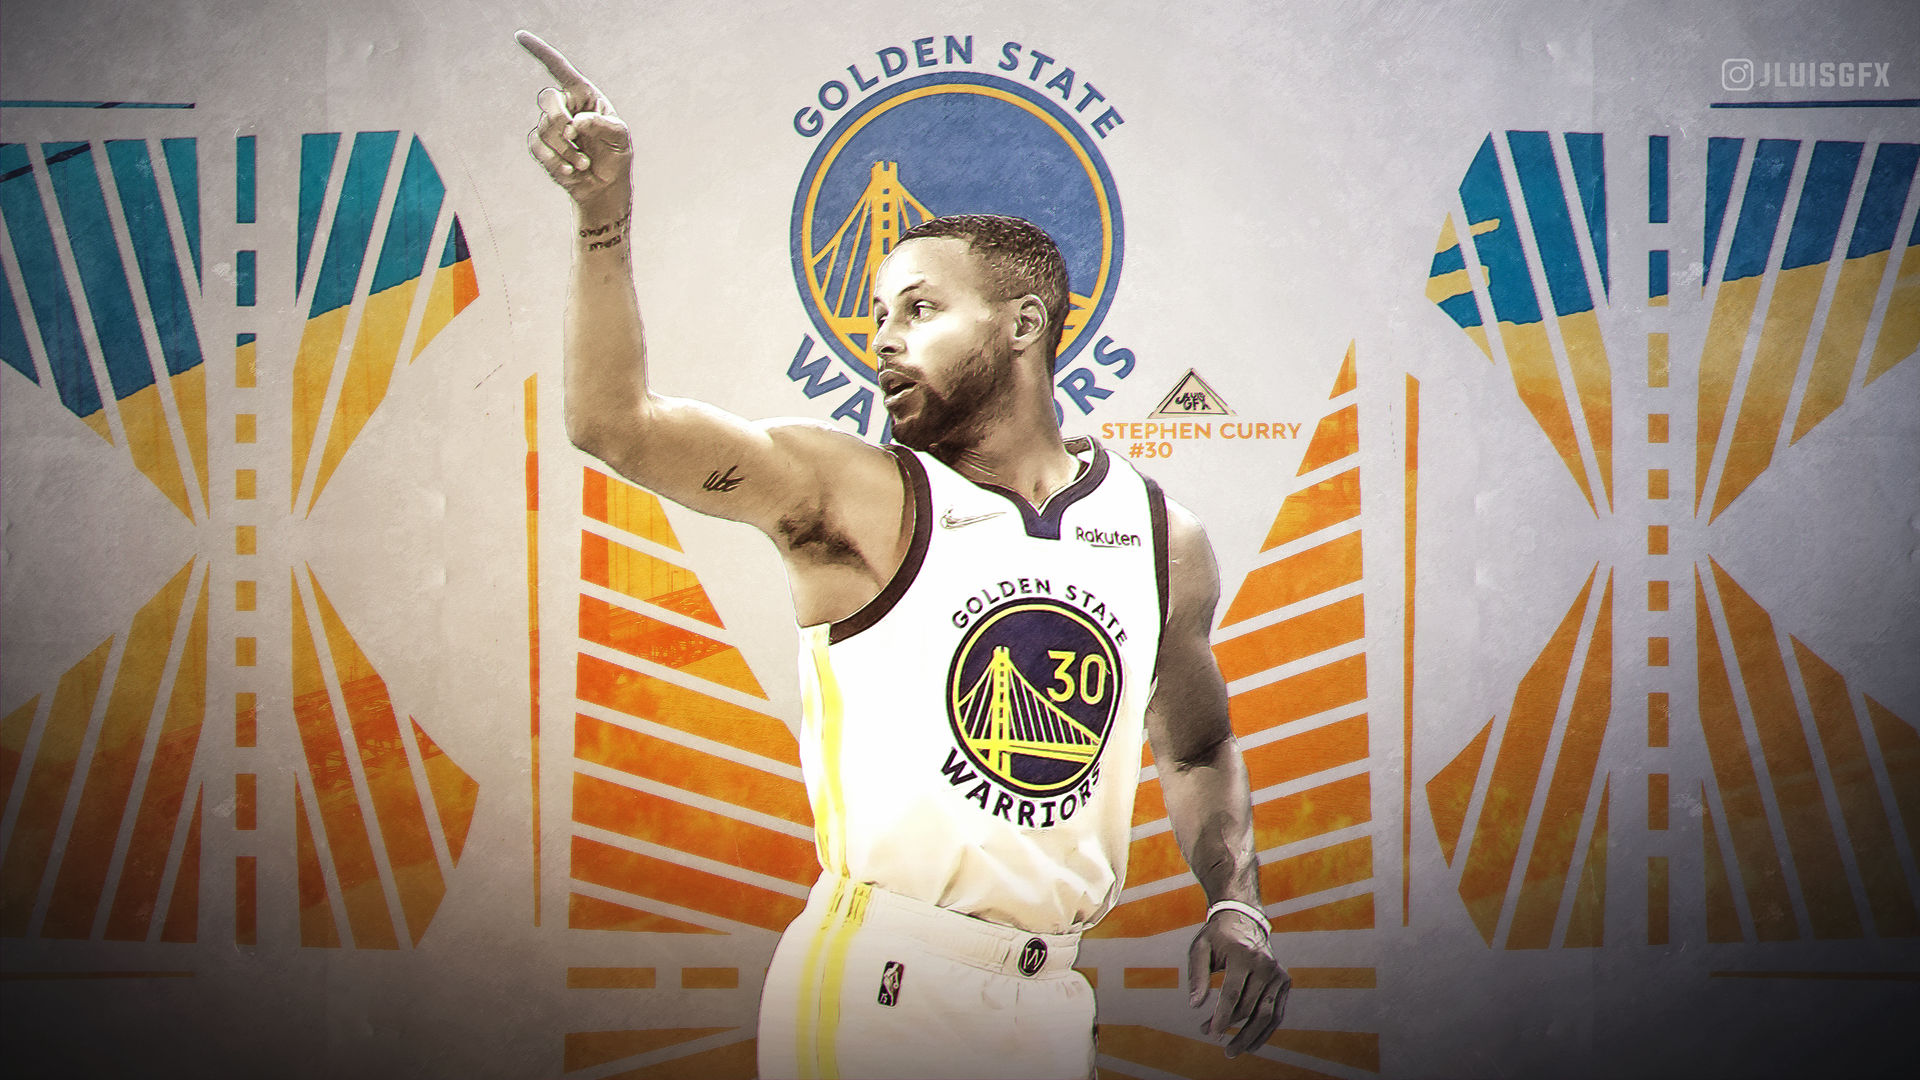 Stephen Curry - Wallpaper by JeanLuisEditions on DeviantArt